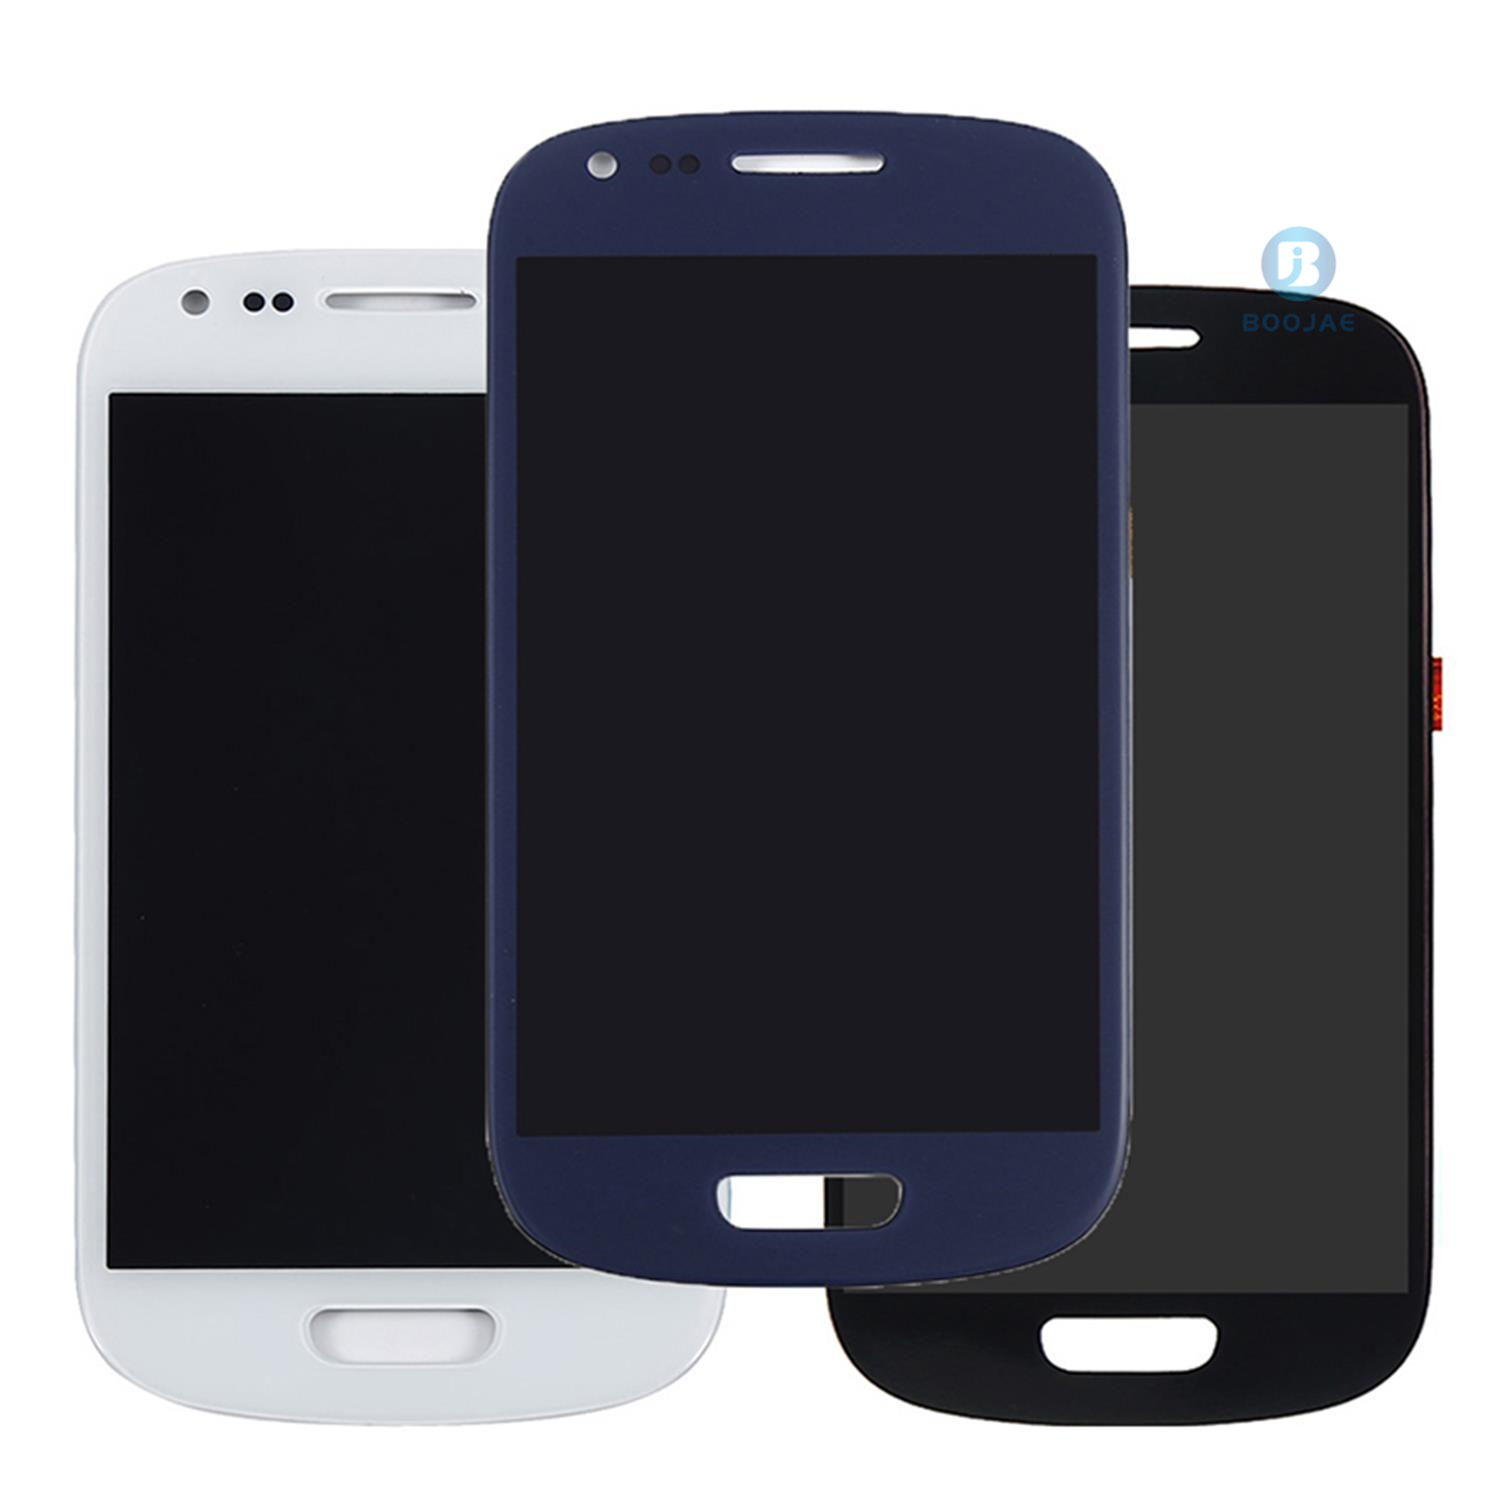 Samsung Galaxy S3 Mini LCD Screen Display and Touch Panel Digitizer Assembly Replacement